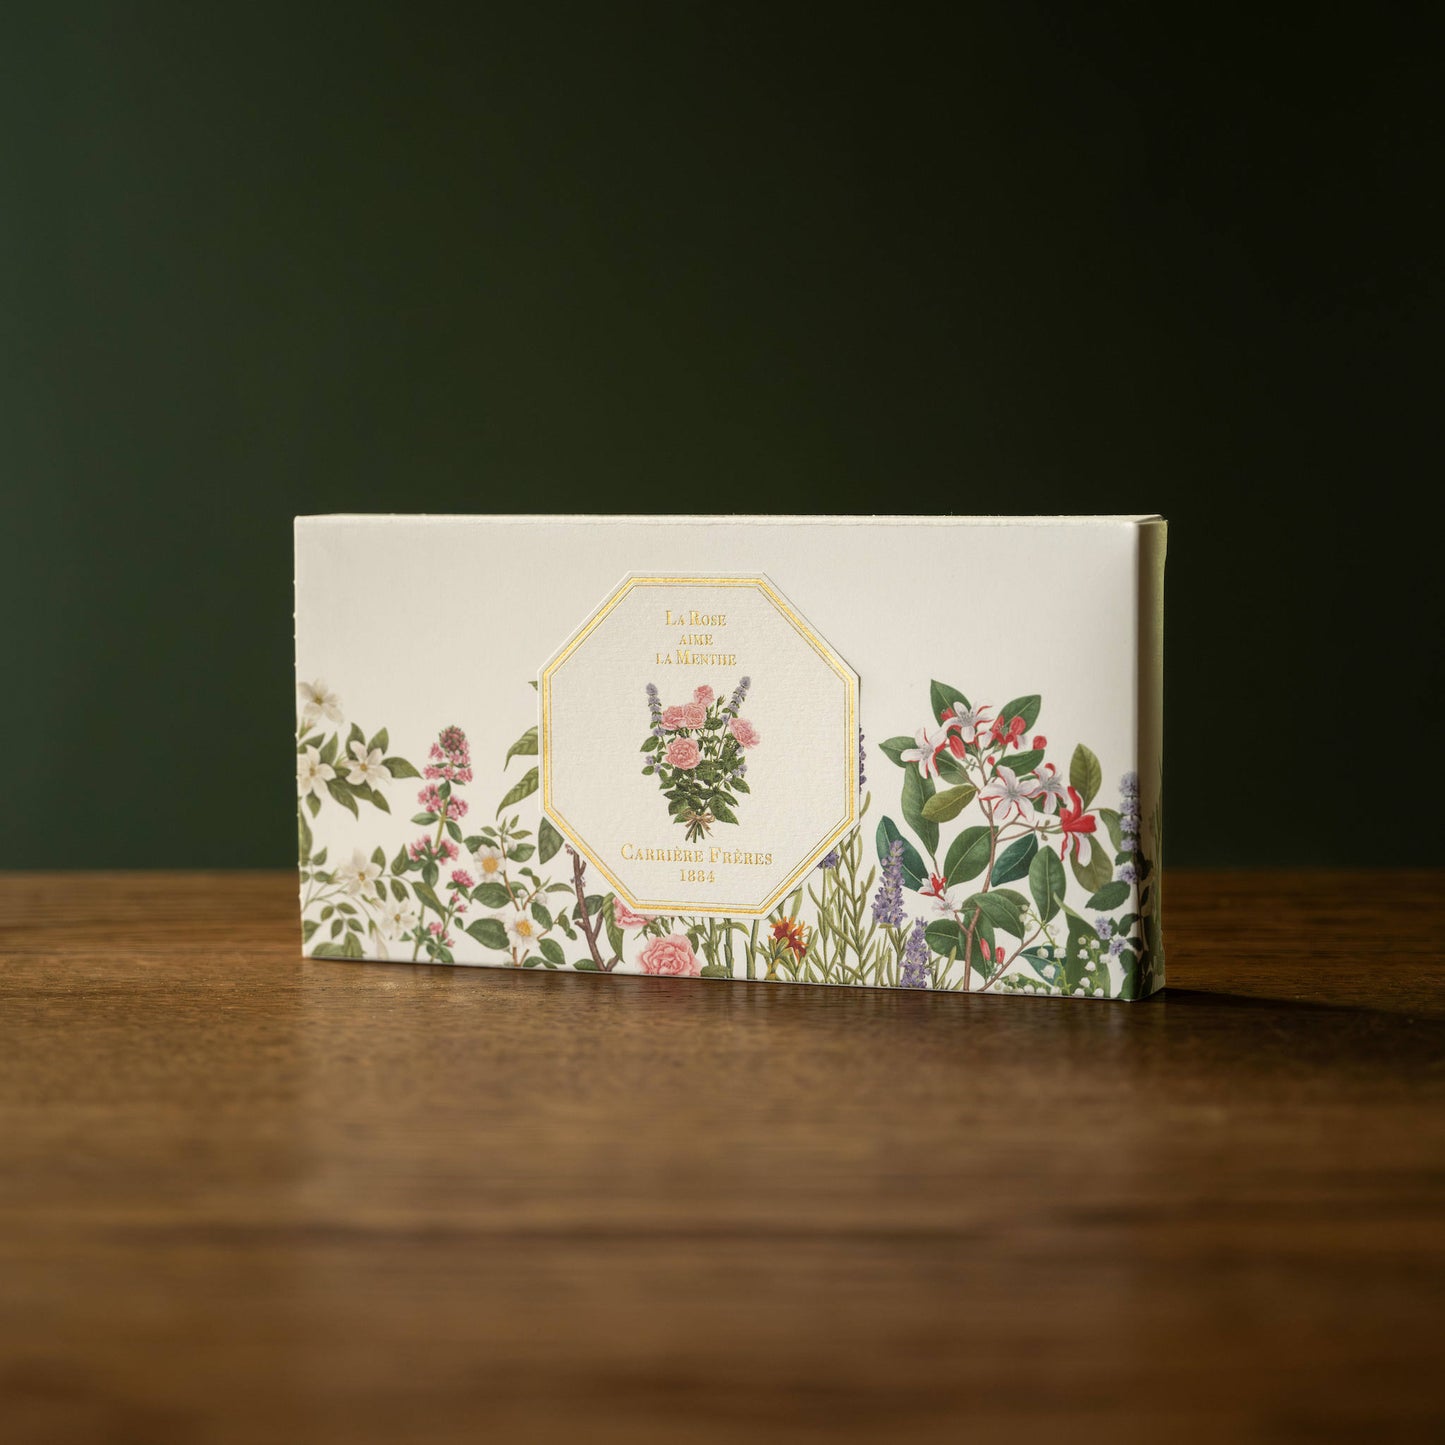 Carriere Freres Rose Menthe Botanical Palet Box